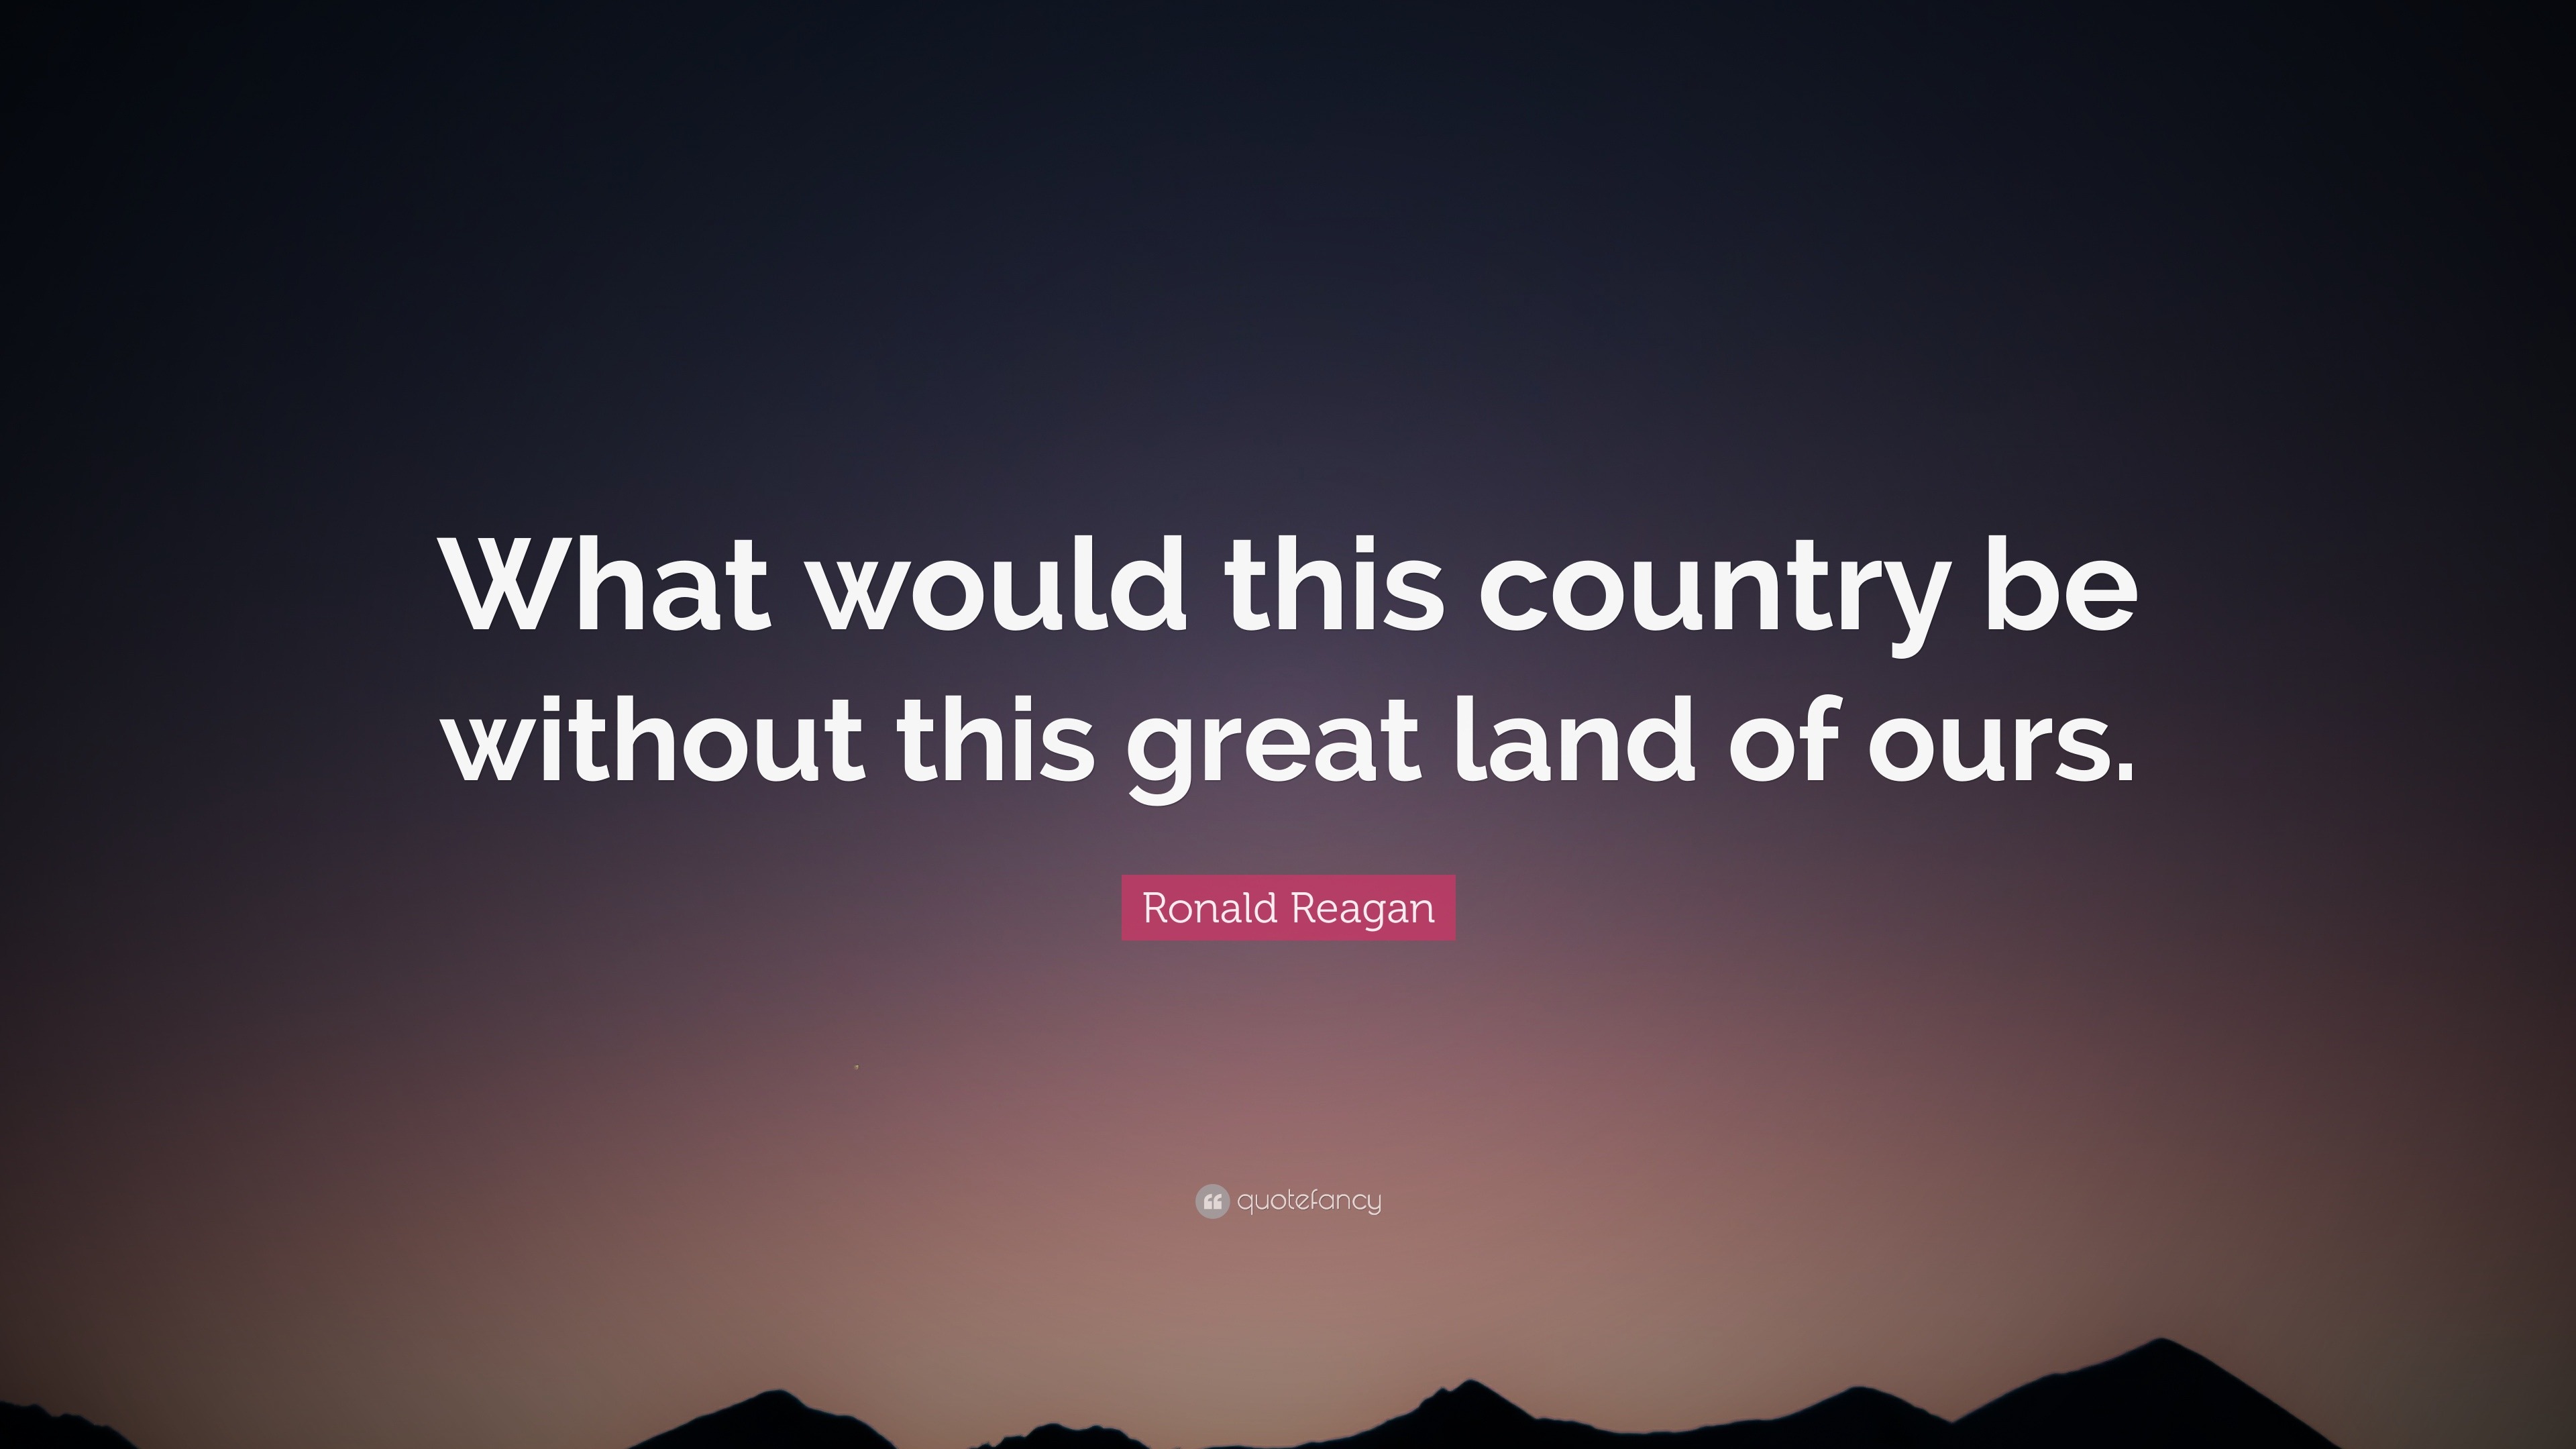 Ronald Reagan Quote: “What would this country be without this great ...